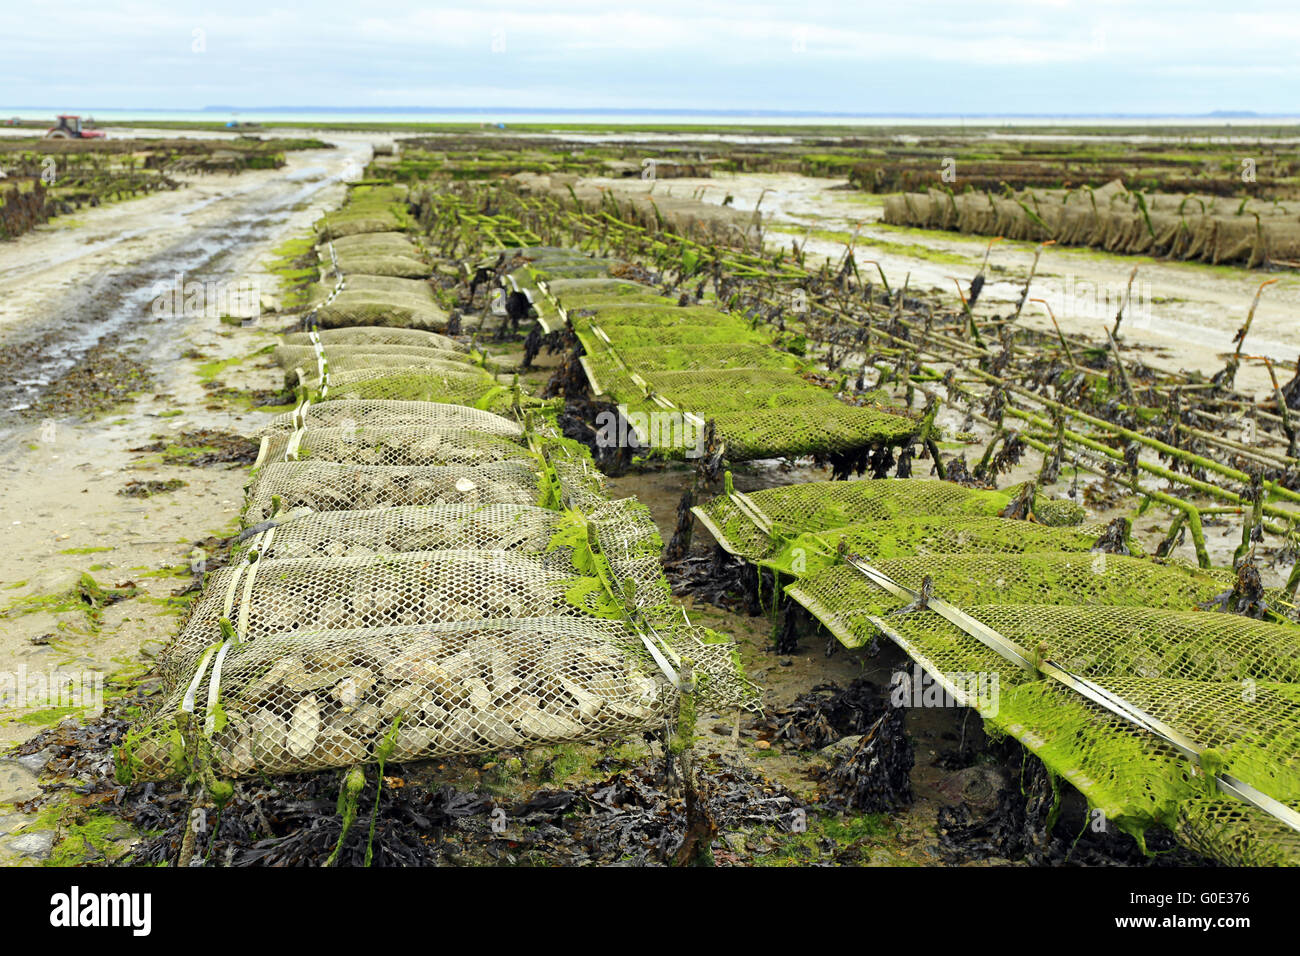 Oyster farming at Cancale, France Stock Photo